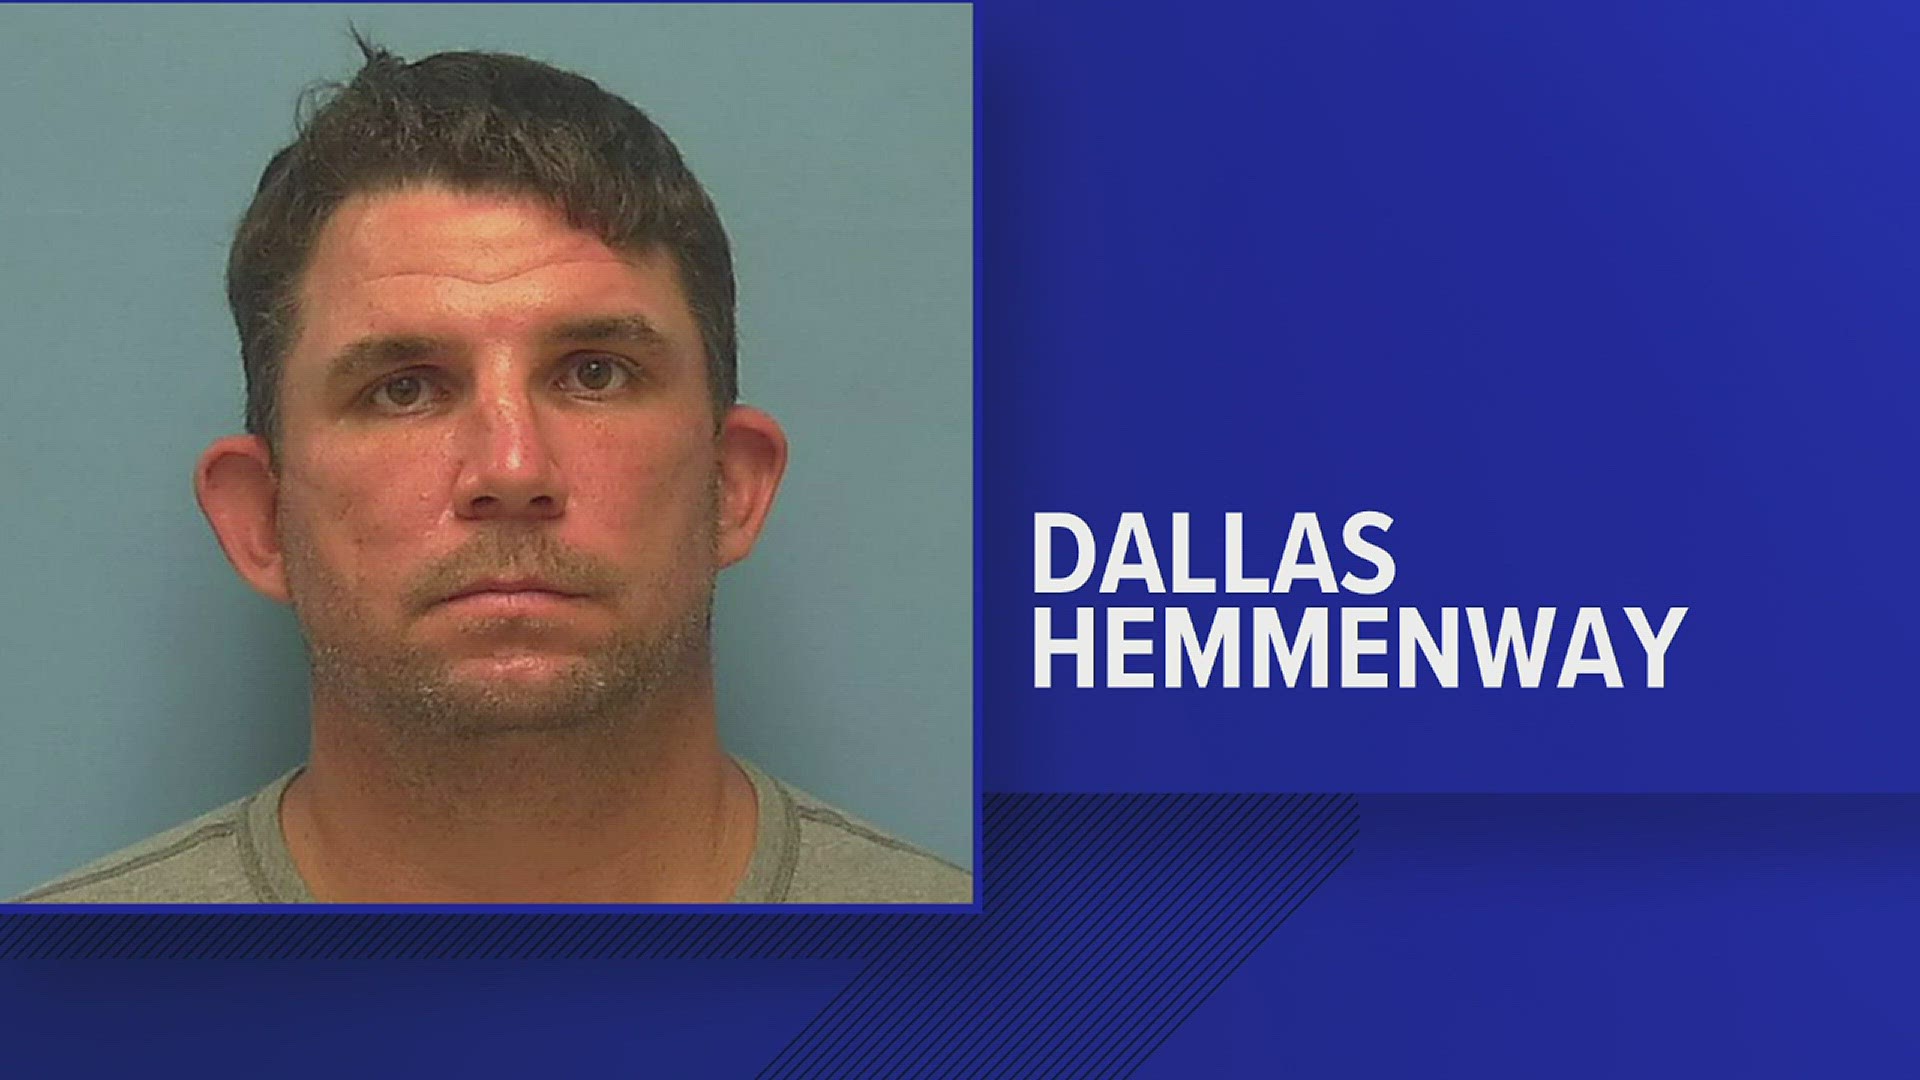 Dallas Hemmenway, 41, was driving a pickup truck when it left a Vidor roadway and hit some trees, ejecting both he and his brother, Tyra Hemmenway, 41.